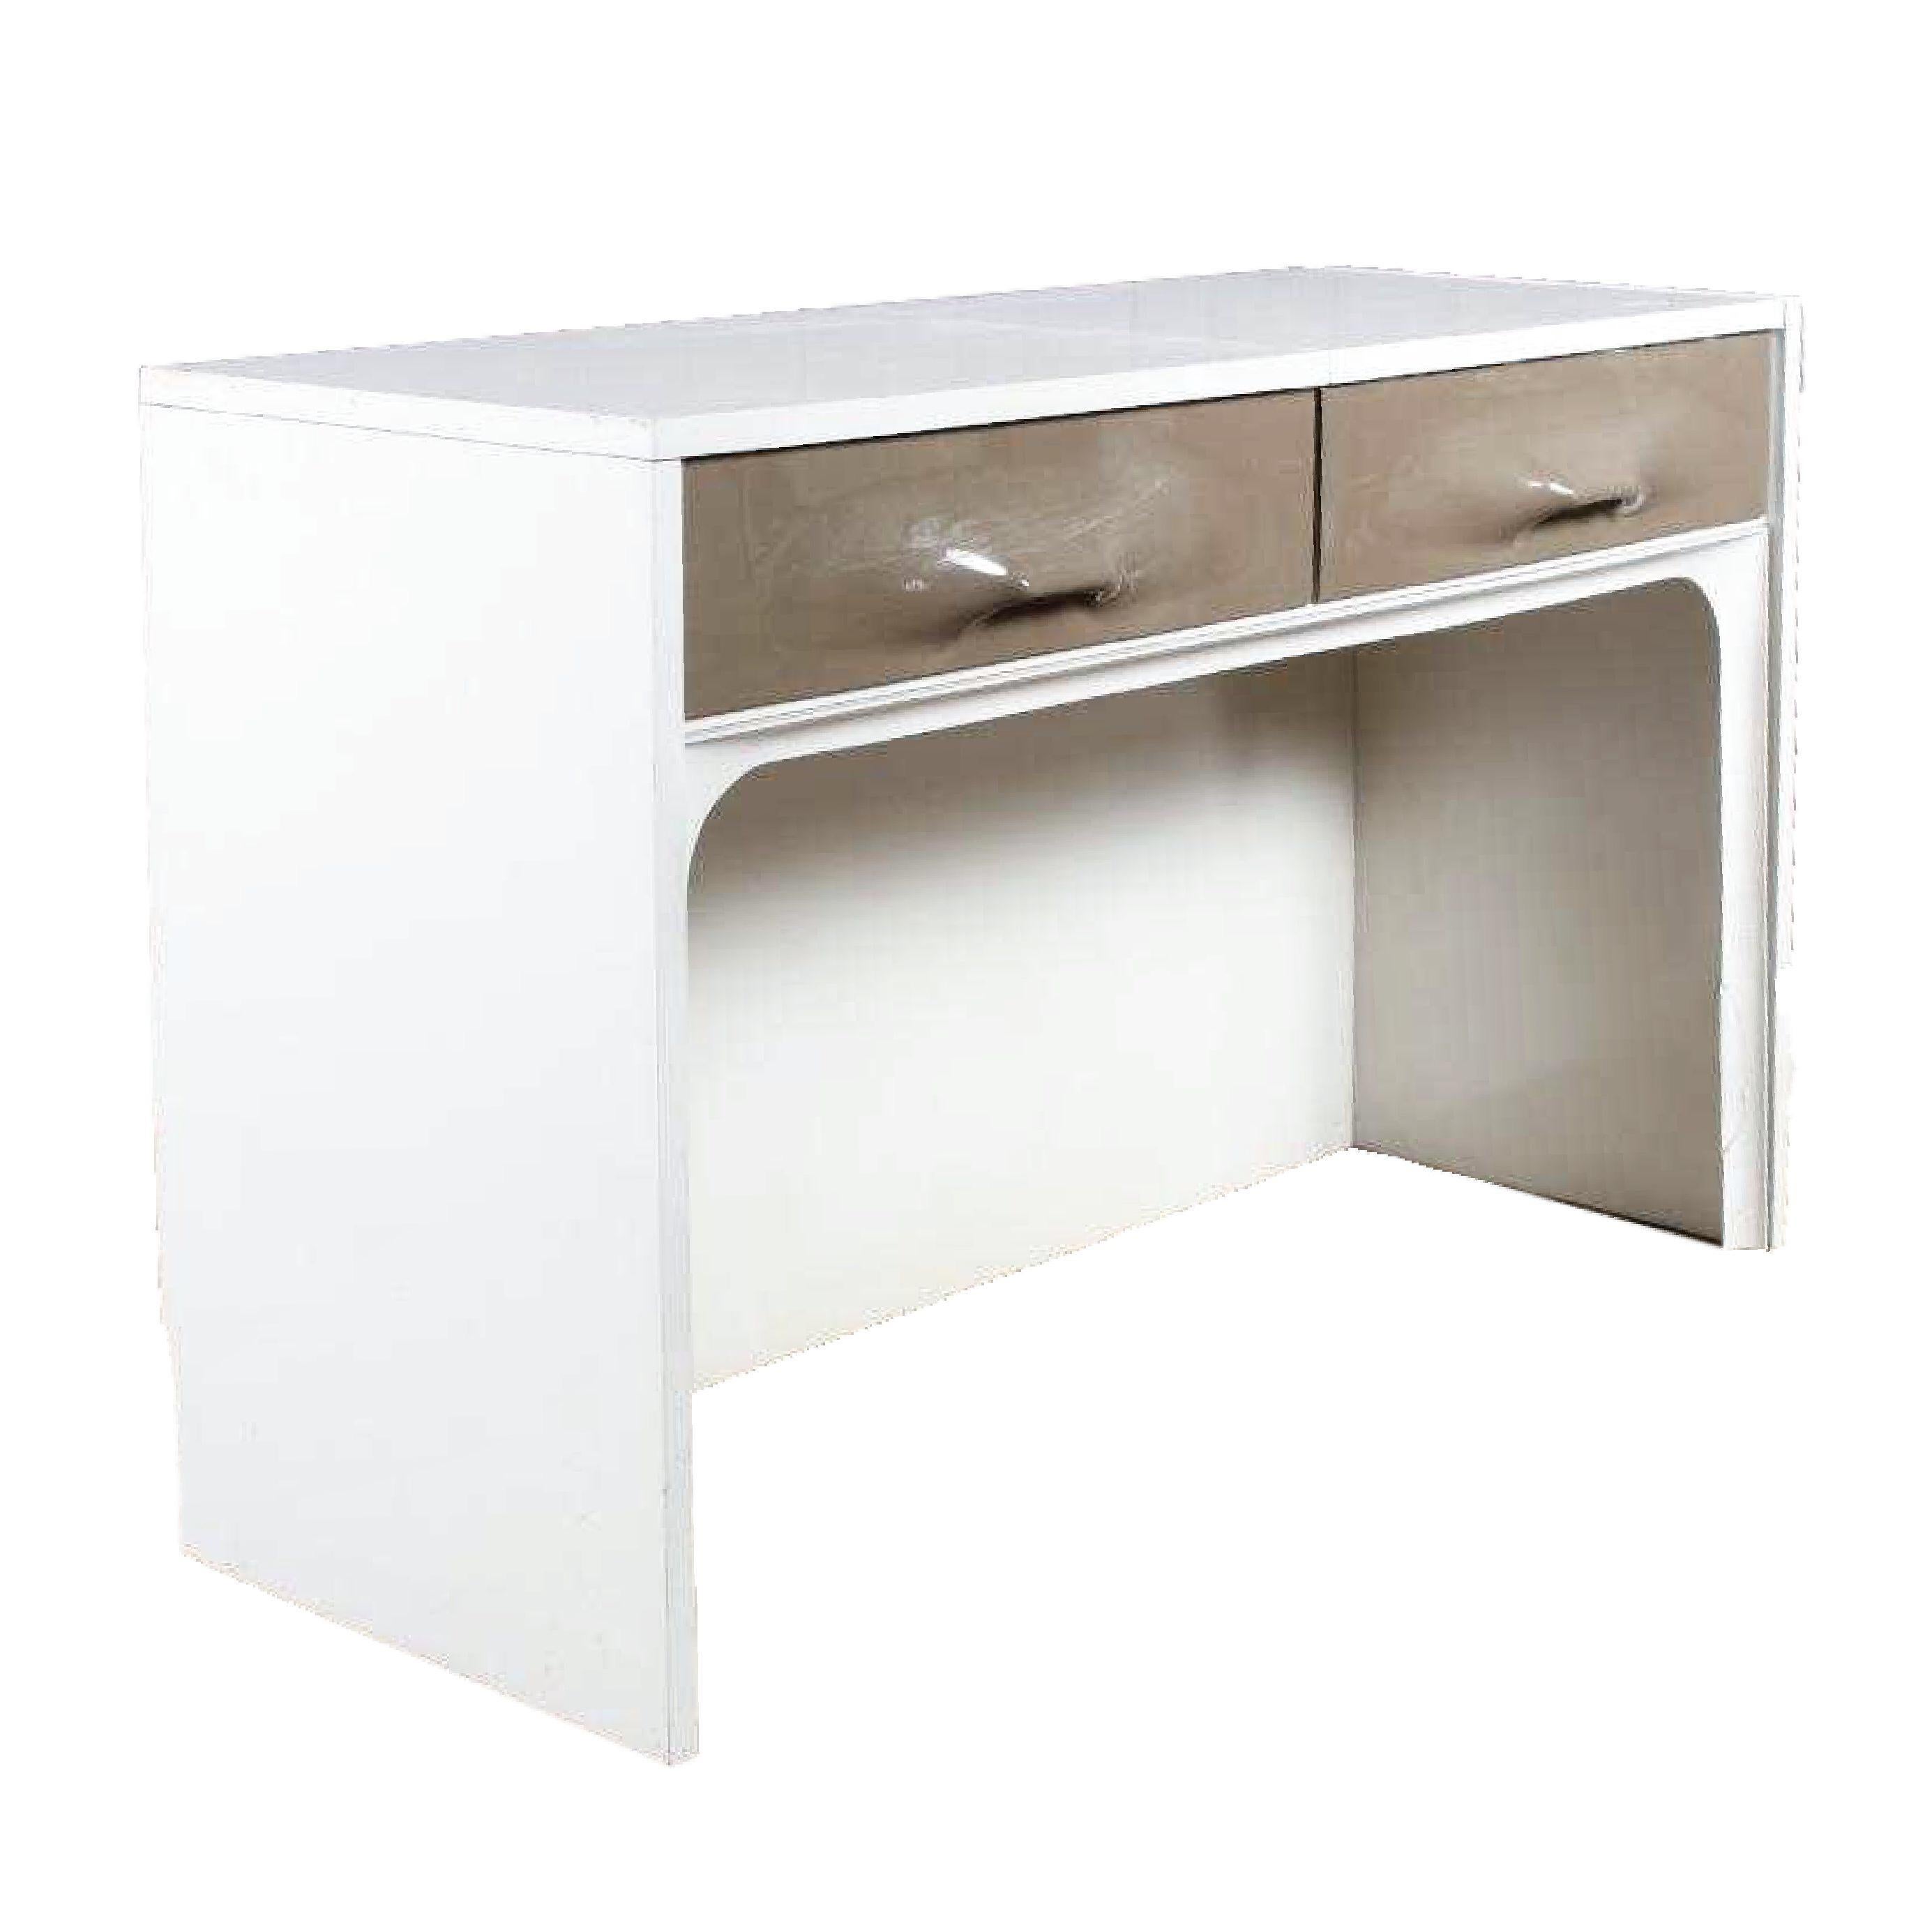 Lacquered wood (white) and French gray polycarbonate drawer fronts. One drawer front actually lifts to reveal a sizable mirror and additional surface / basin for storage. Toiletries at your fingertips, where you left them, mirror in tow, but hidden